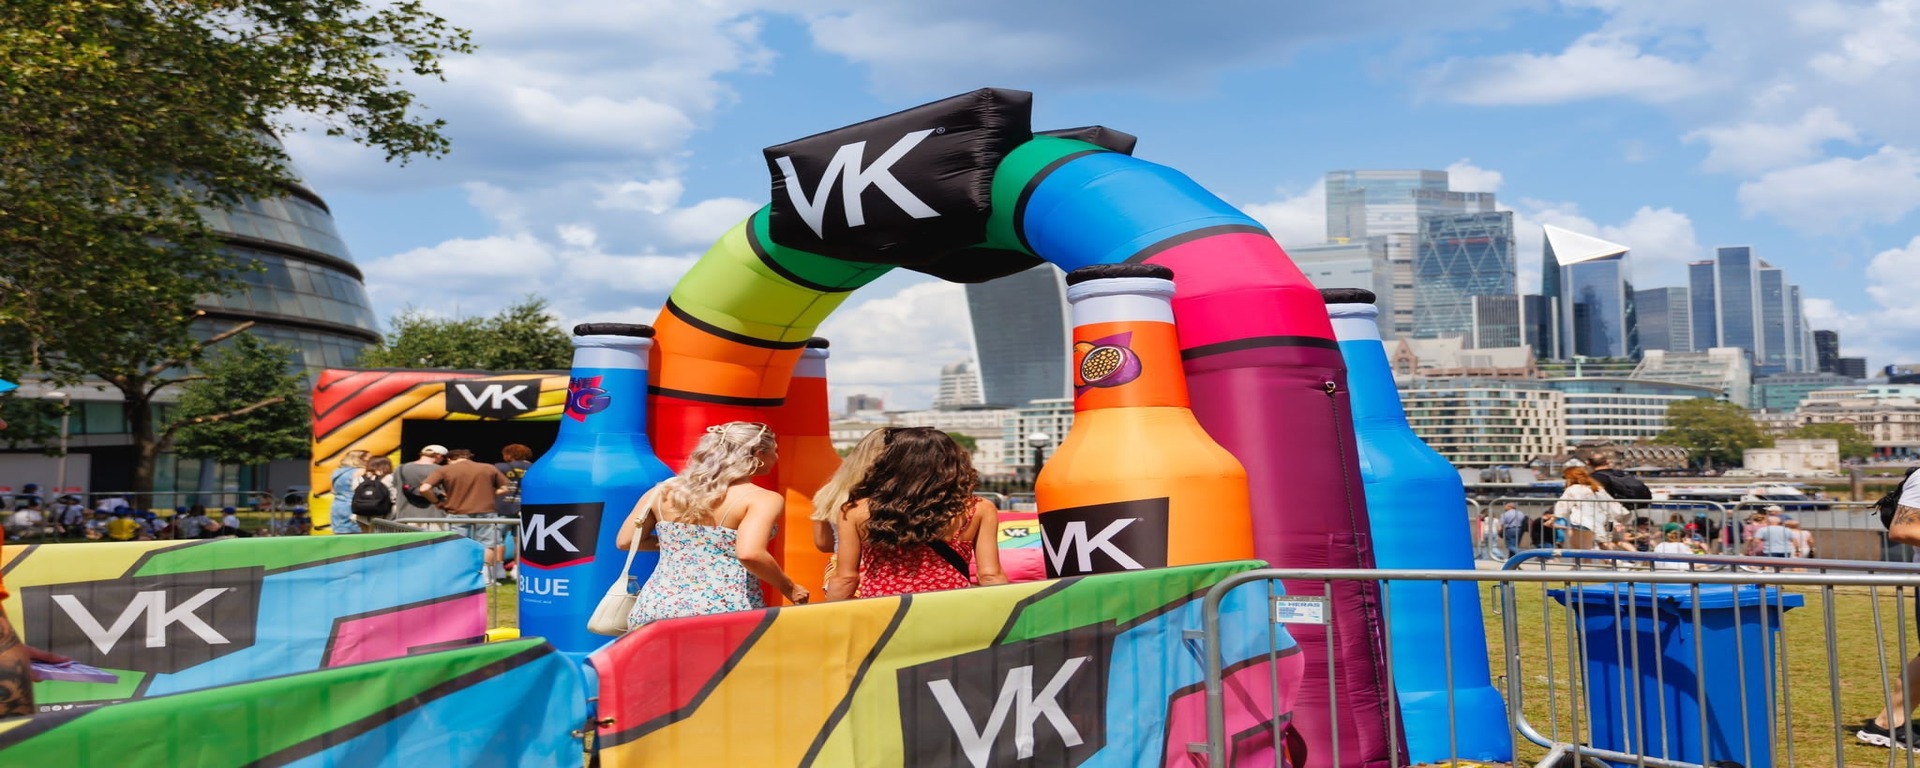 VK Arch inflatable branded